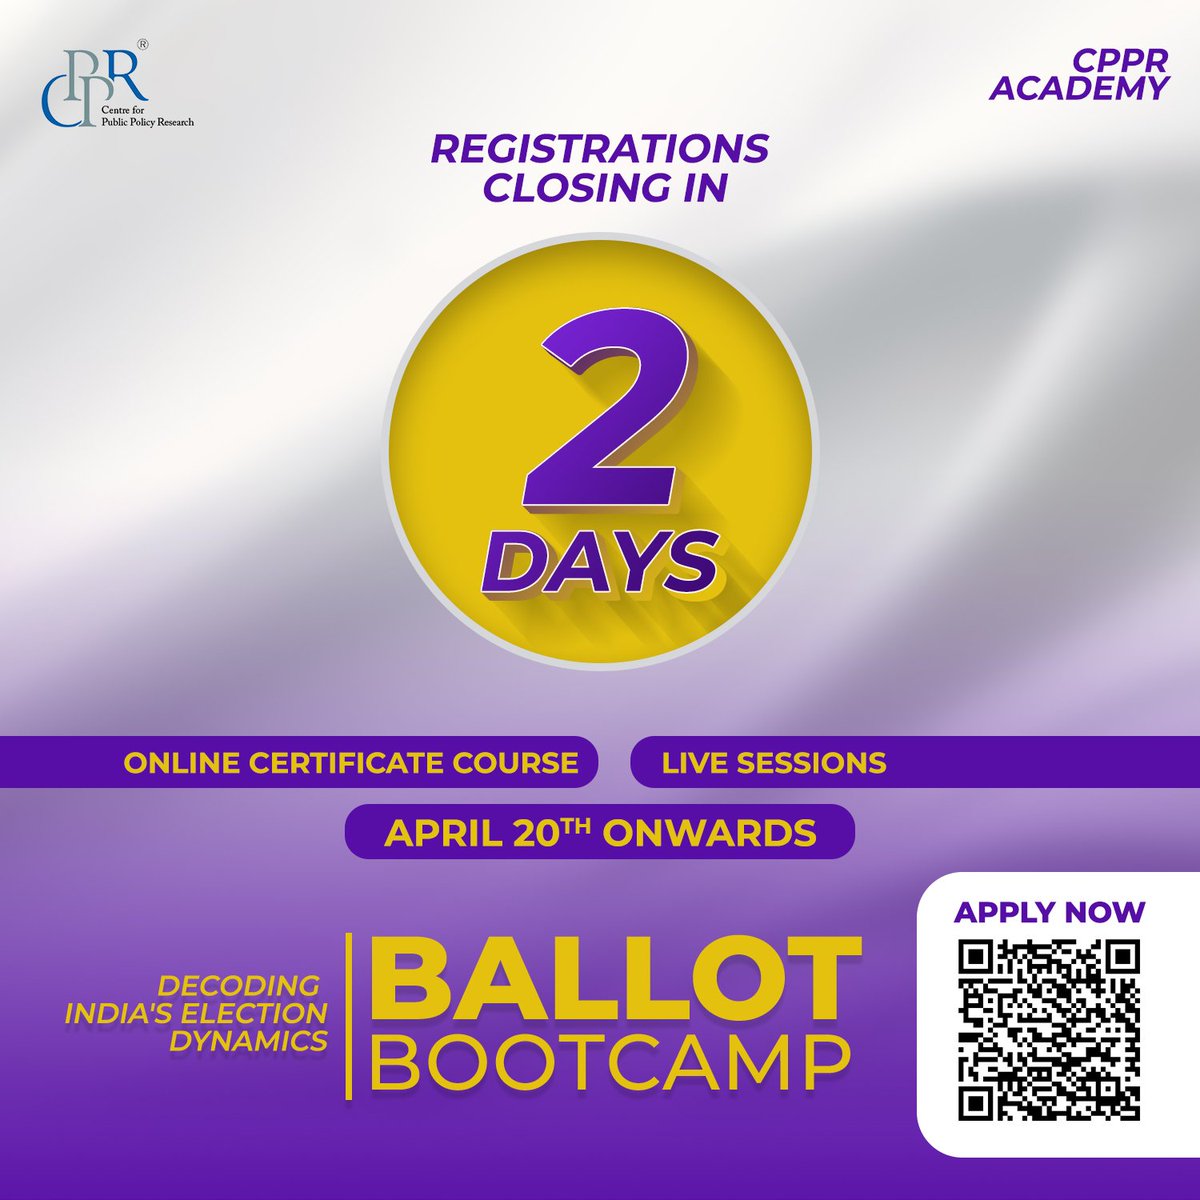 2 Days to go!

Registrations Closing Soon for #CPPRAcademy's Online Certificate Course on Decoding India's Election Dynamics.

Learn about #Elections in India, from History to Strategy!

Secure your spot now!
cppr.in/ballot-bootcam…

#Elections2024
#onlinecourses